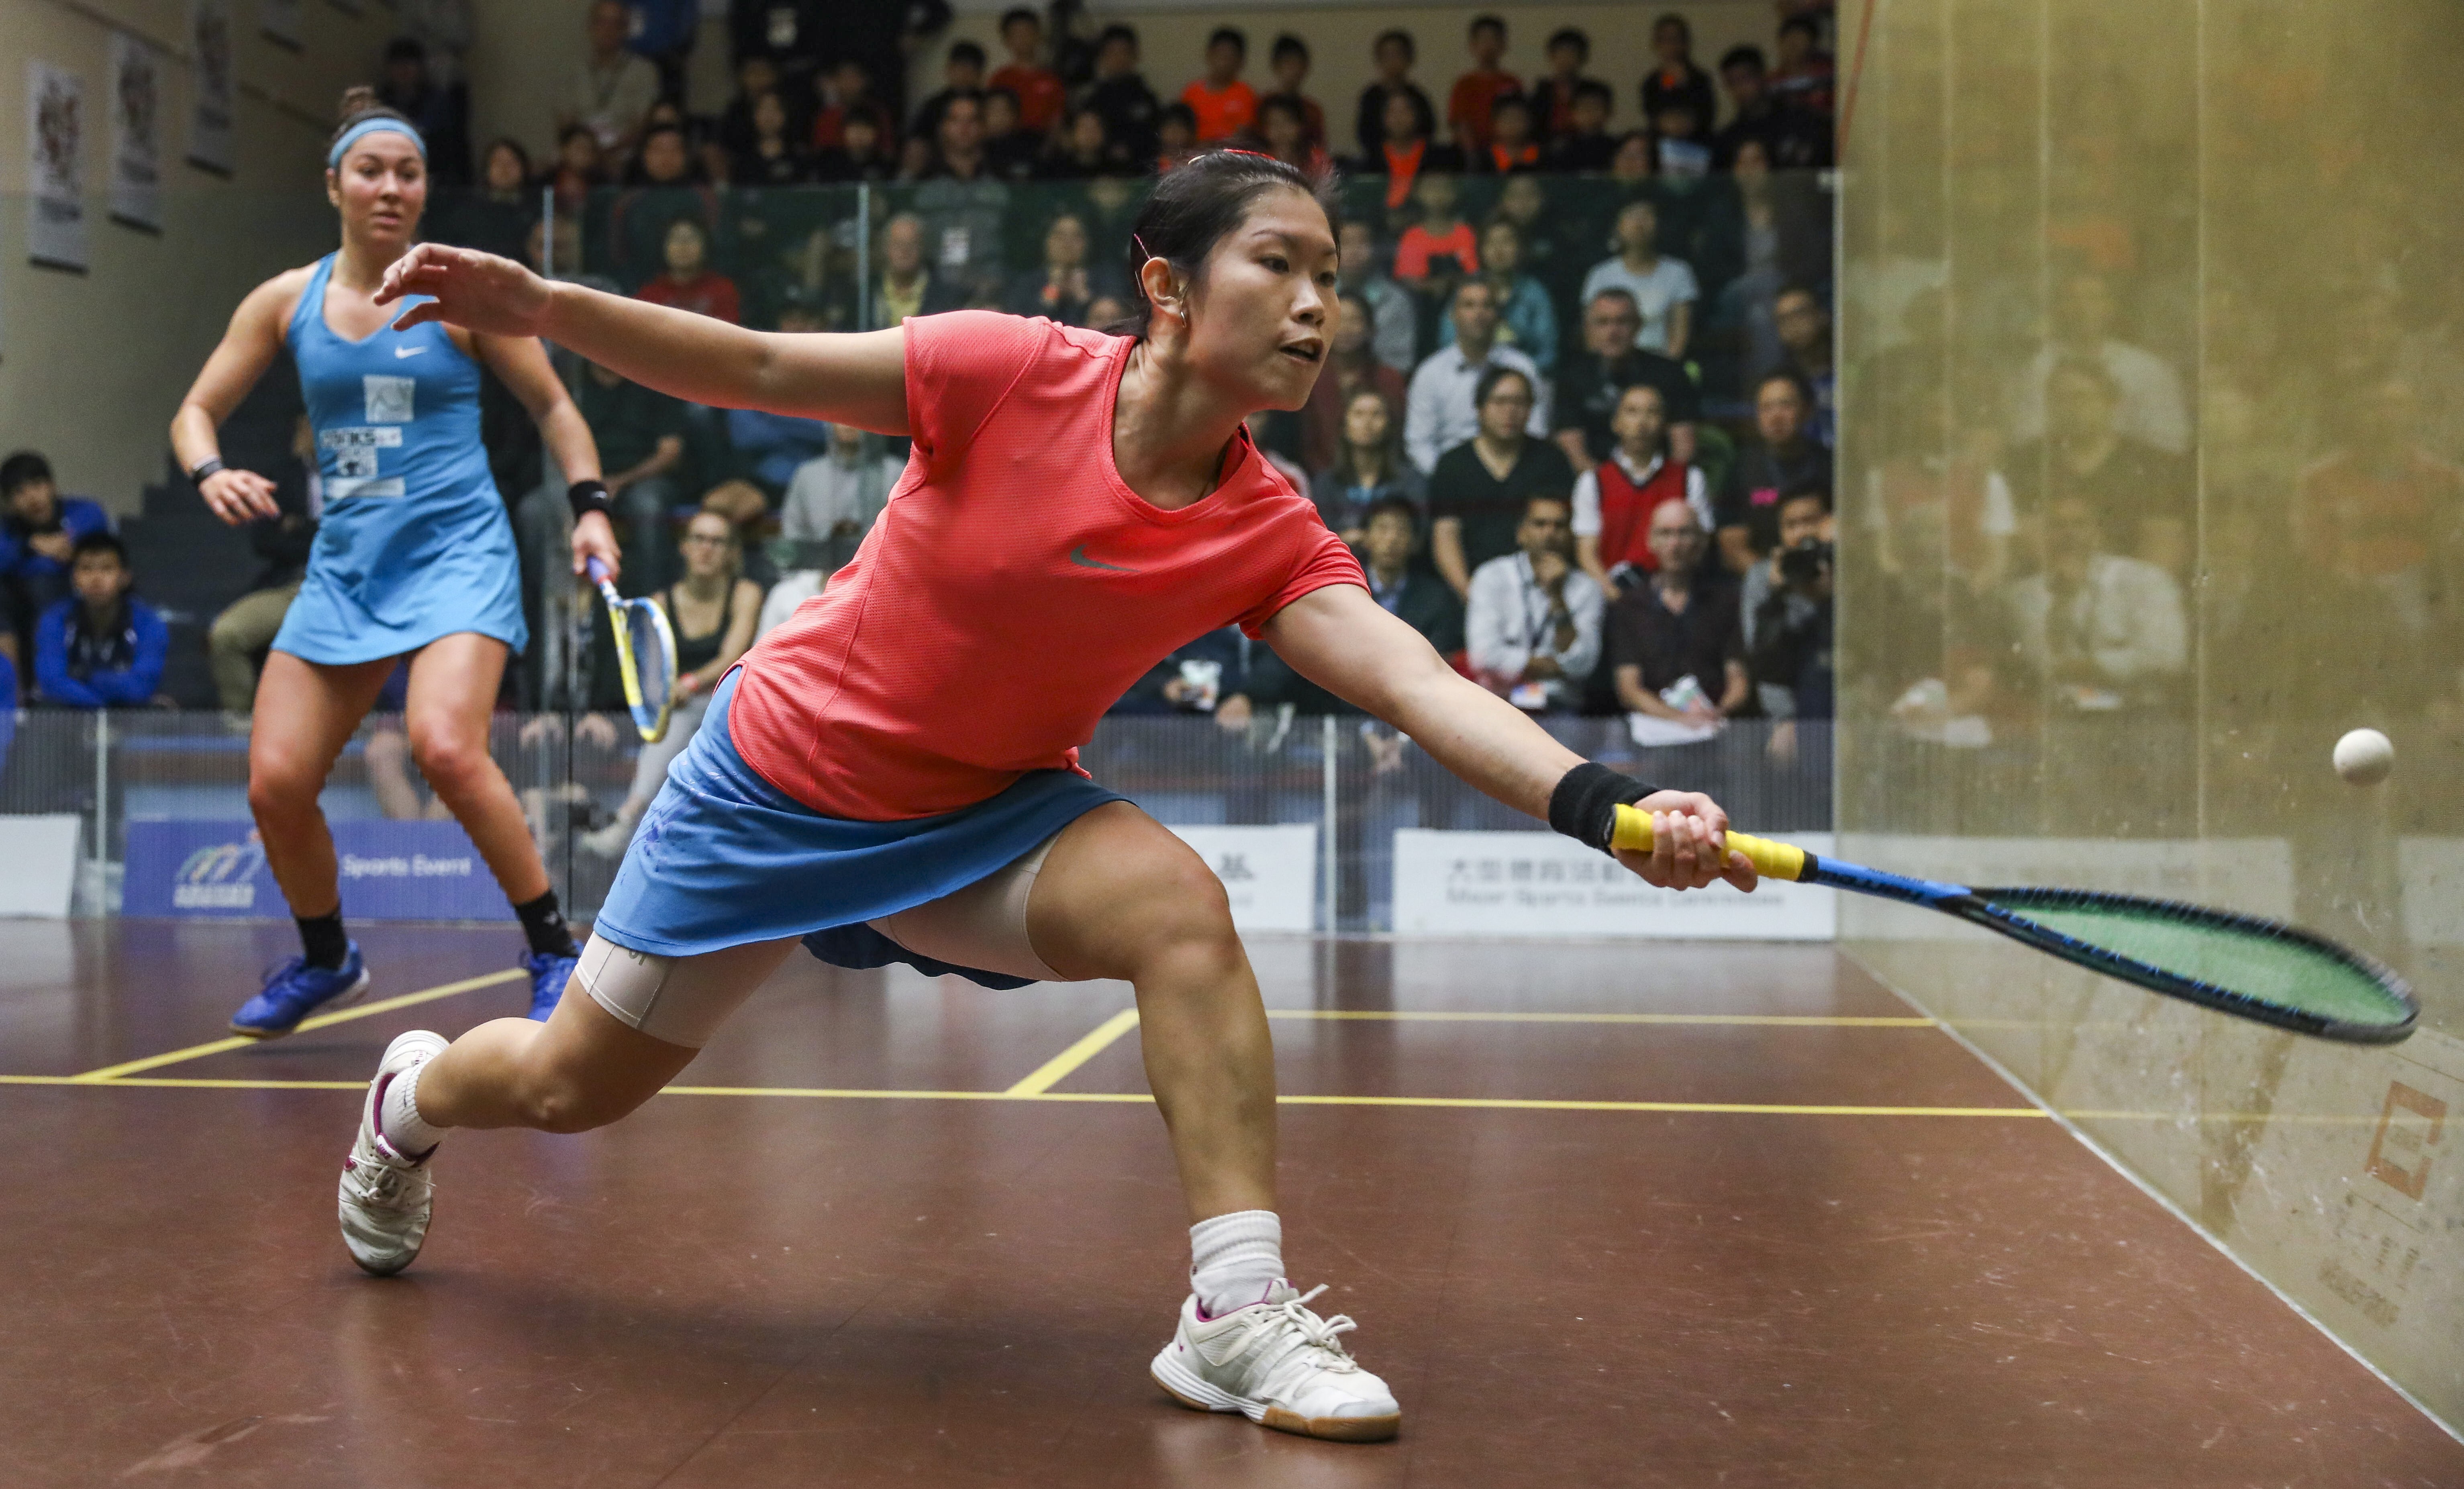 Annie Au, who retired 12 months ago, reached a world ranking of sixth in 2012, the highest ever for a Hong Kong squash player. Photo: Dickson Lee